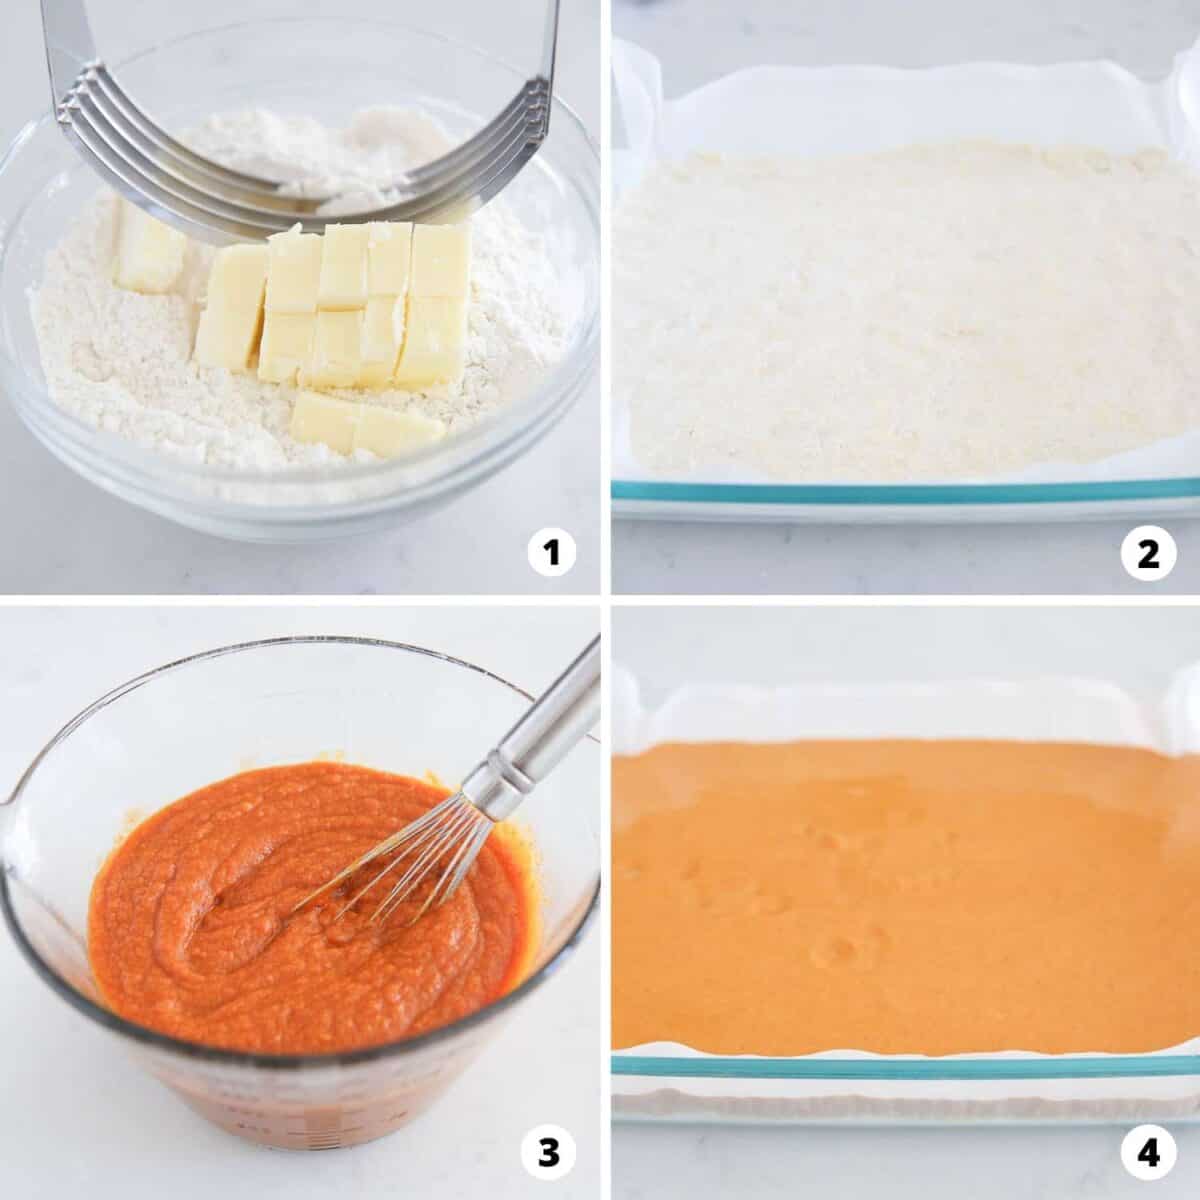 The process of how to make pumpkin pie bars in a 4 step collage.